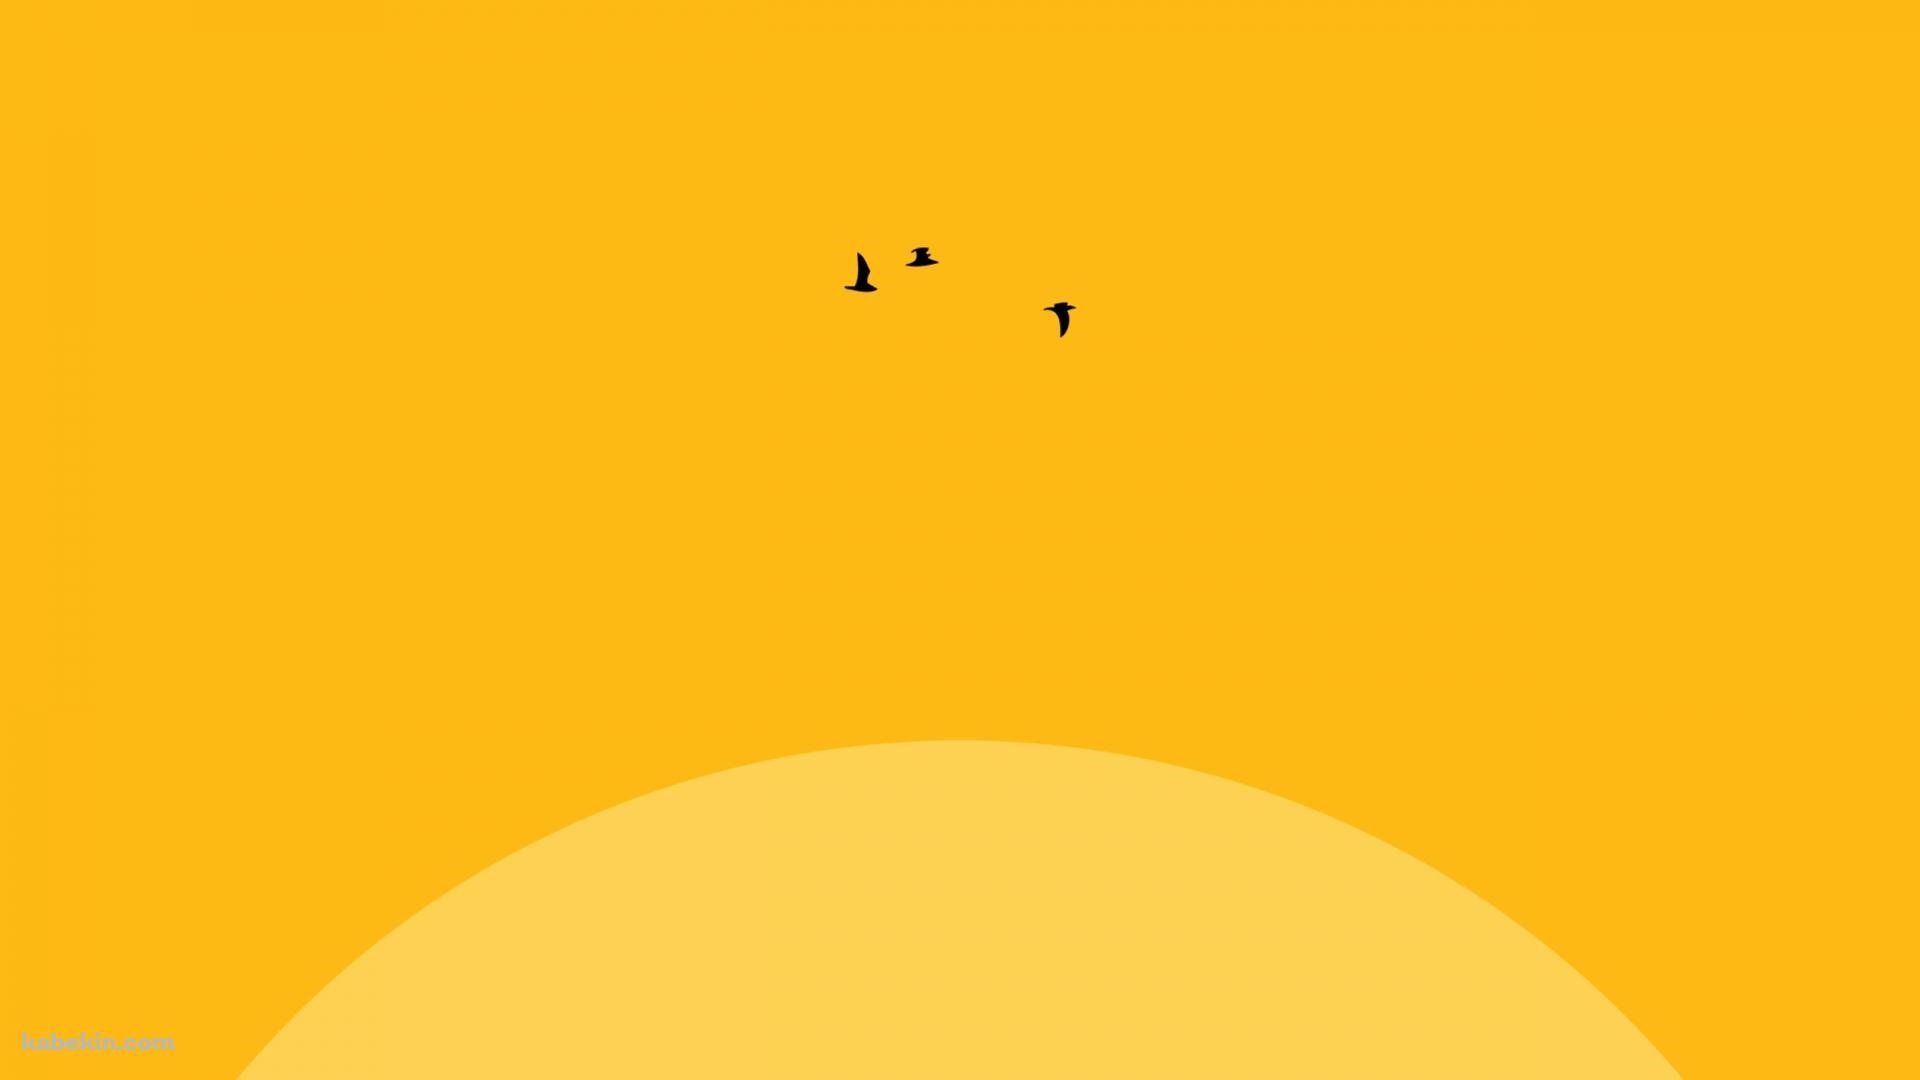 Two birds flying in the sky during sunset wallpaper - Yellow